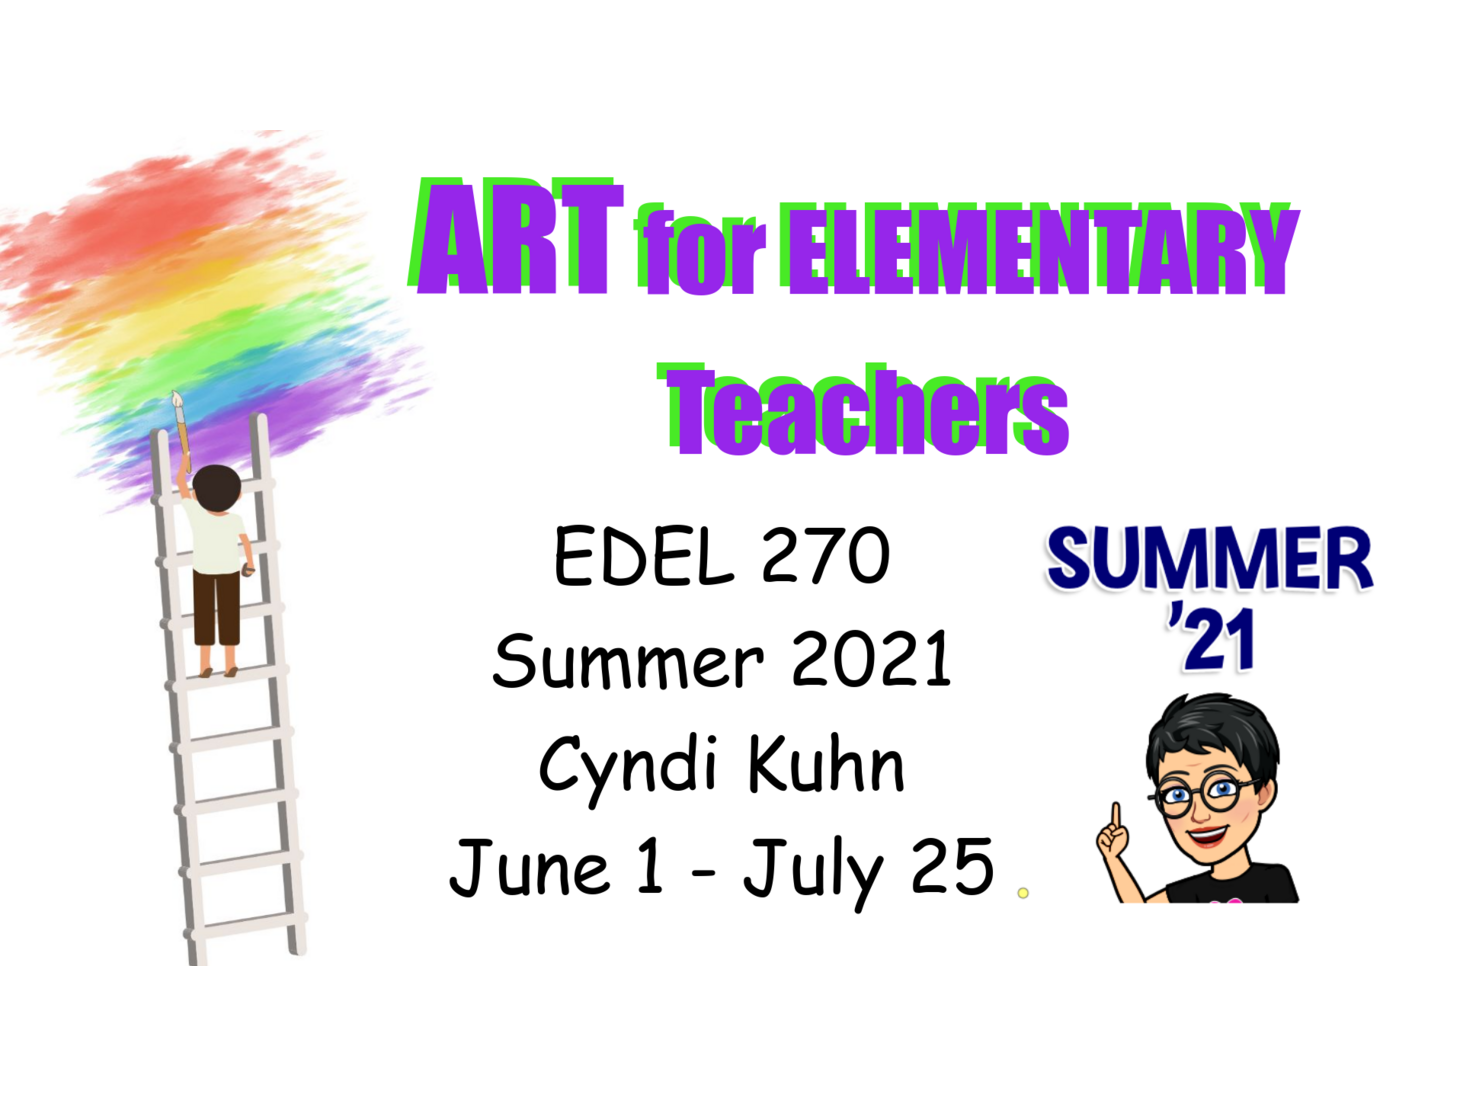 Projects and More from Summer 21 of EDEL 270 Art for Elementary teacher at Kansas State